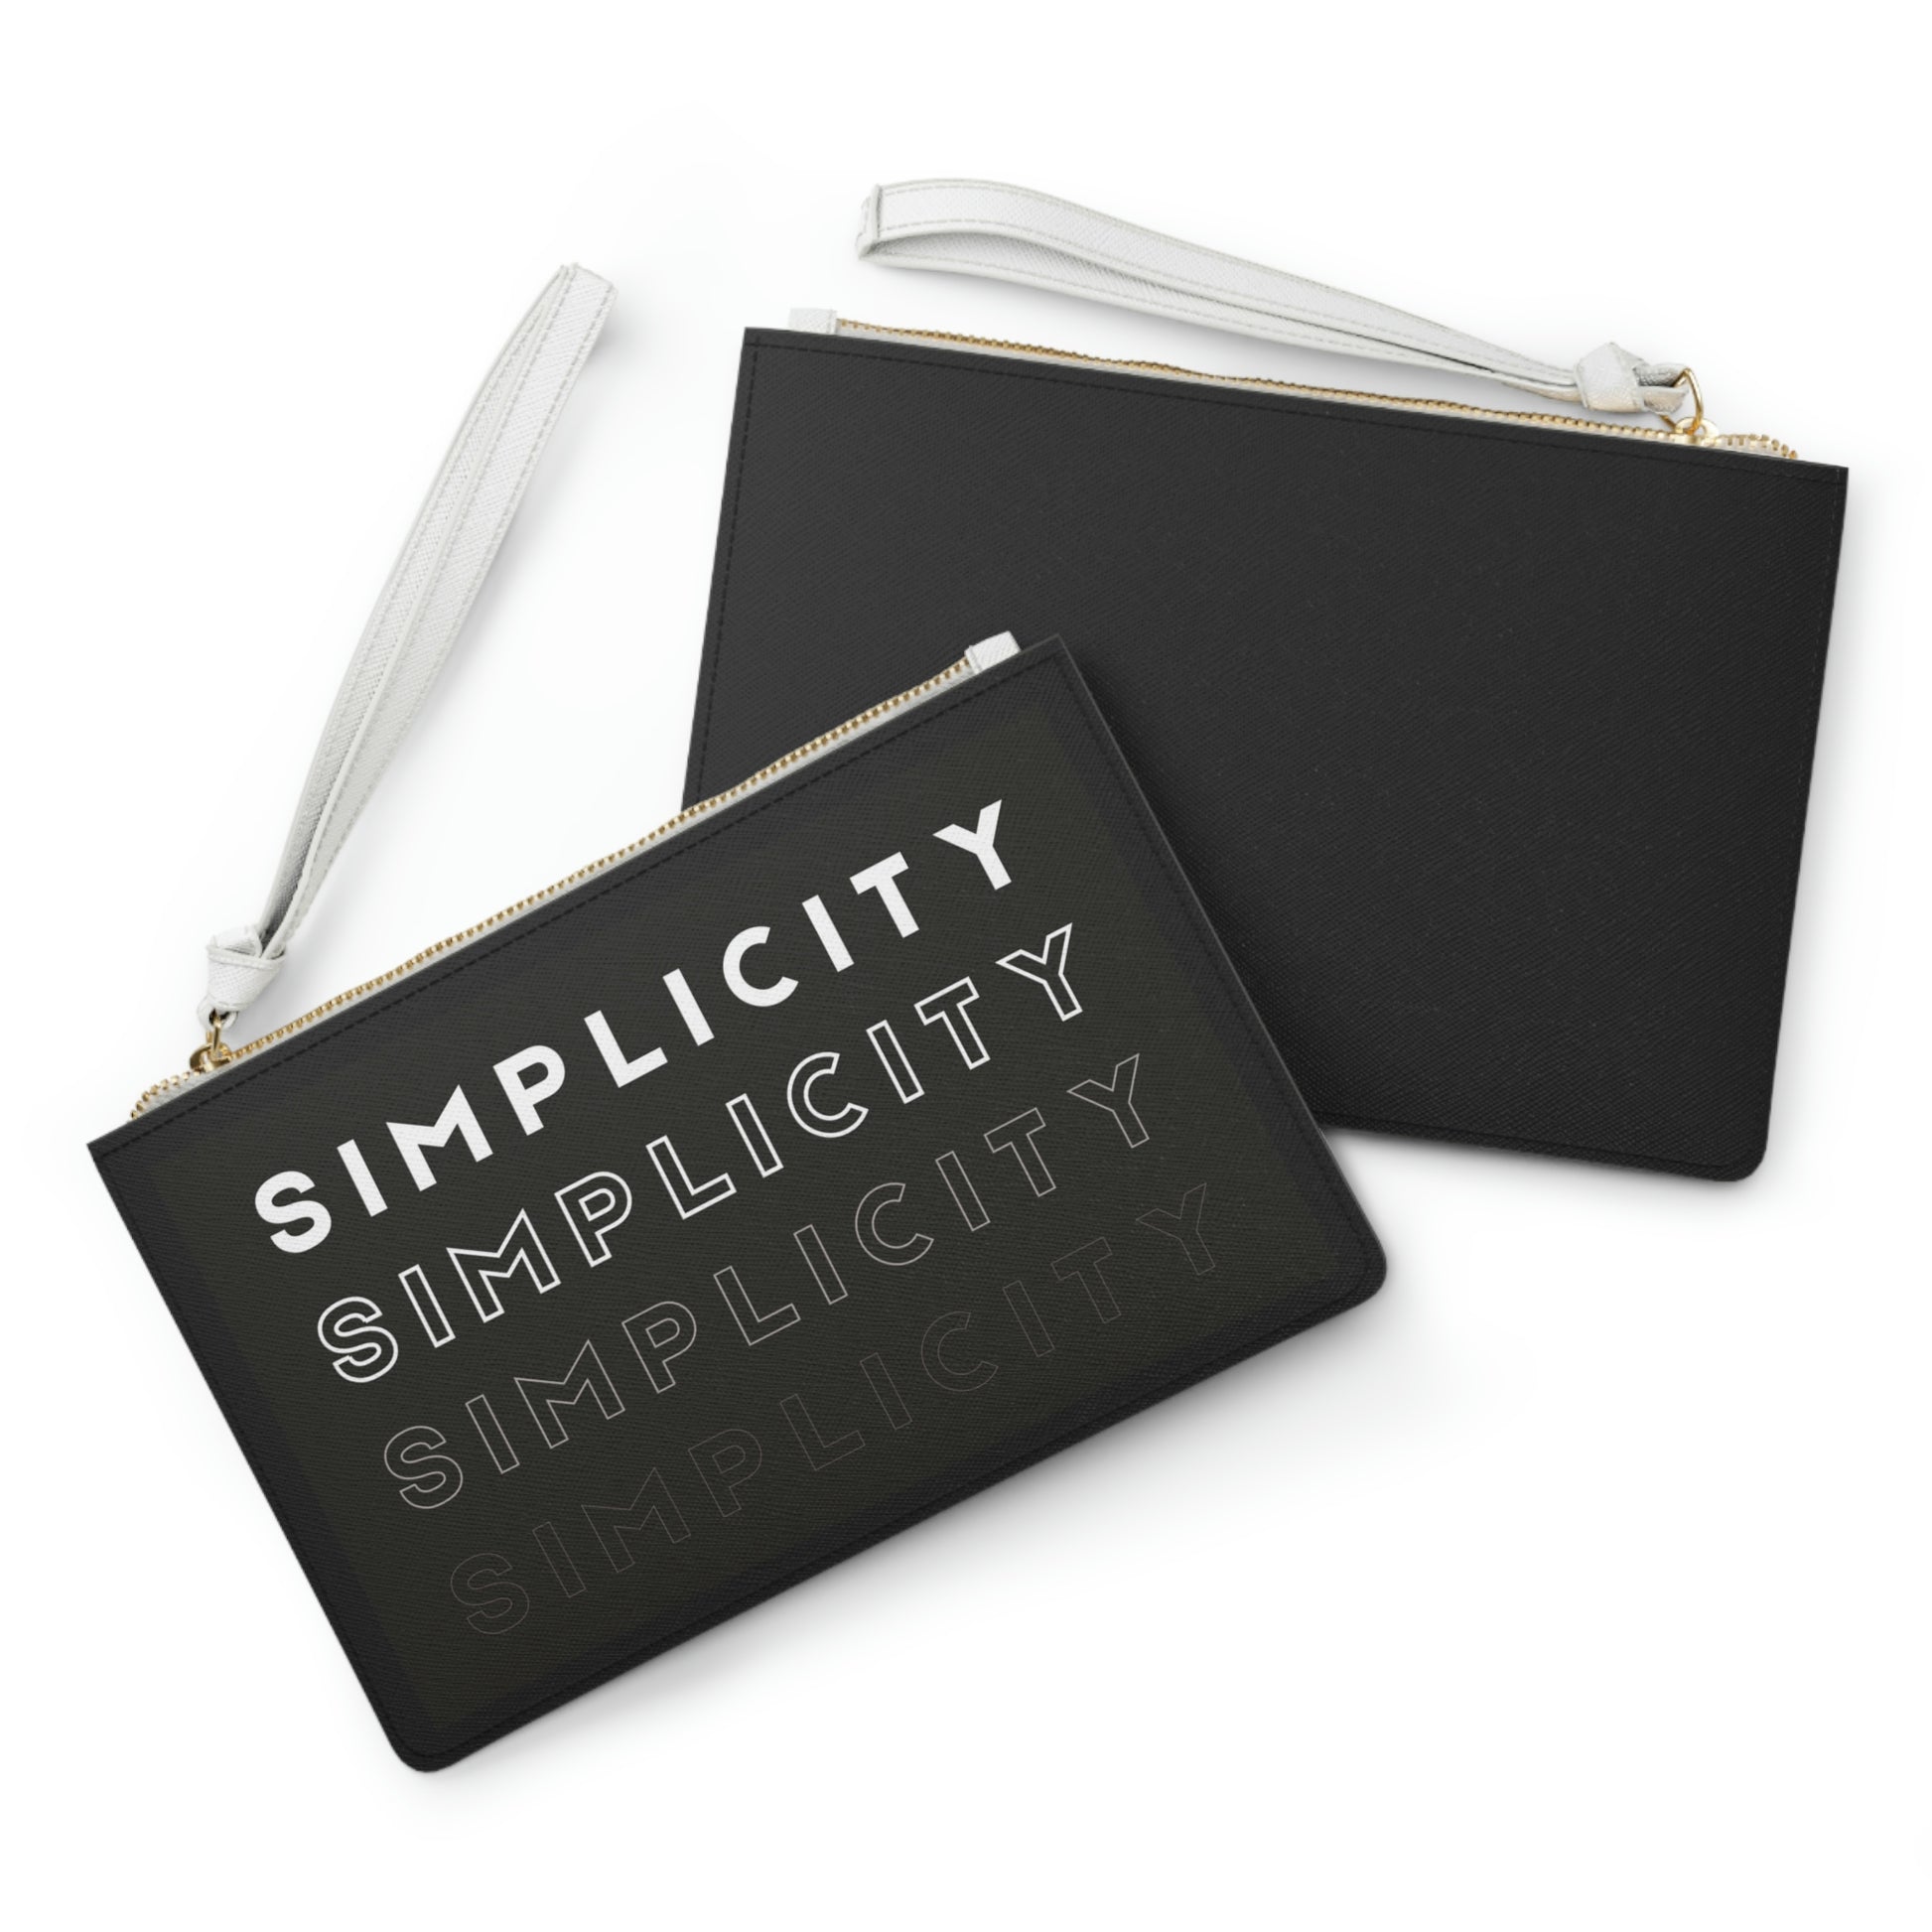 Simplicity Clutch Bag | BKLA | shoes & accessories | backpack, hat, phone cover, tote bags, clutch bags